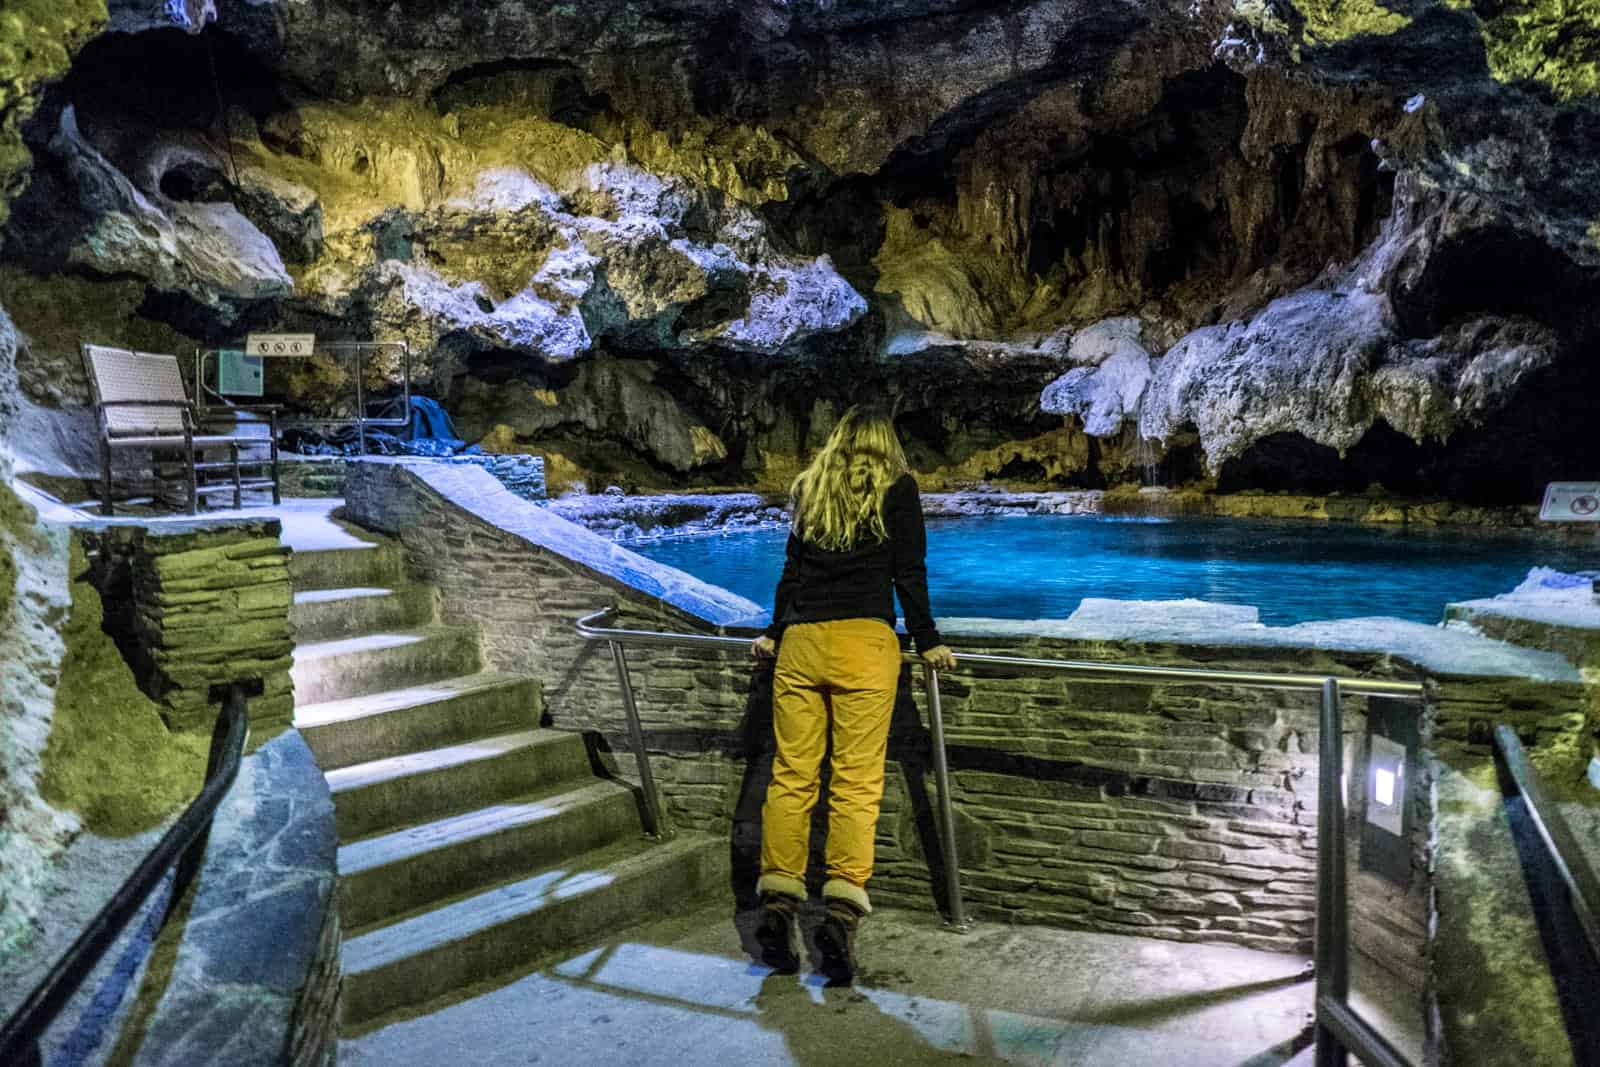 Women looking into the Banff Cave & Basin, Canada